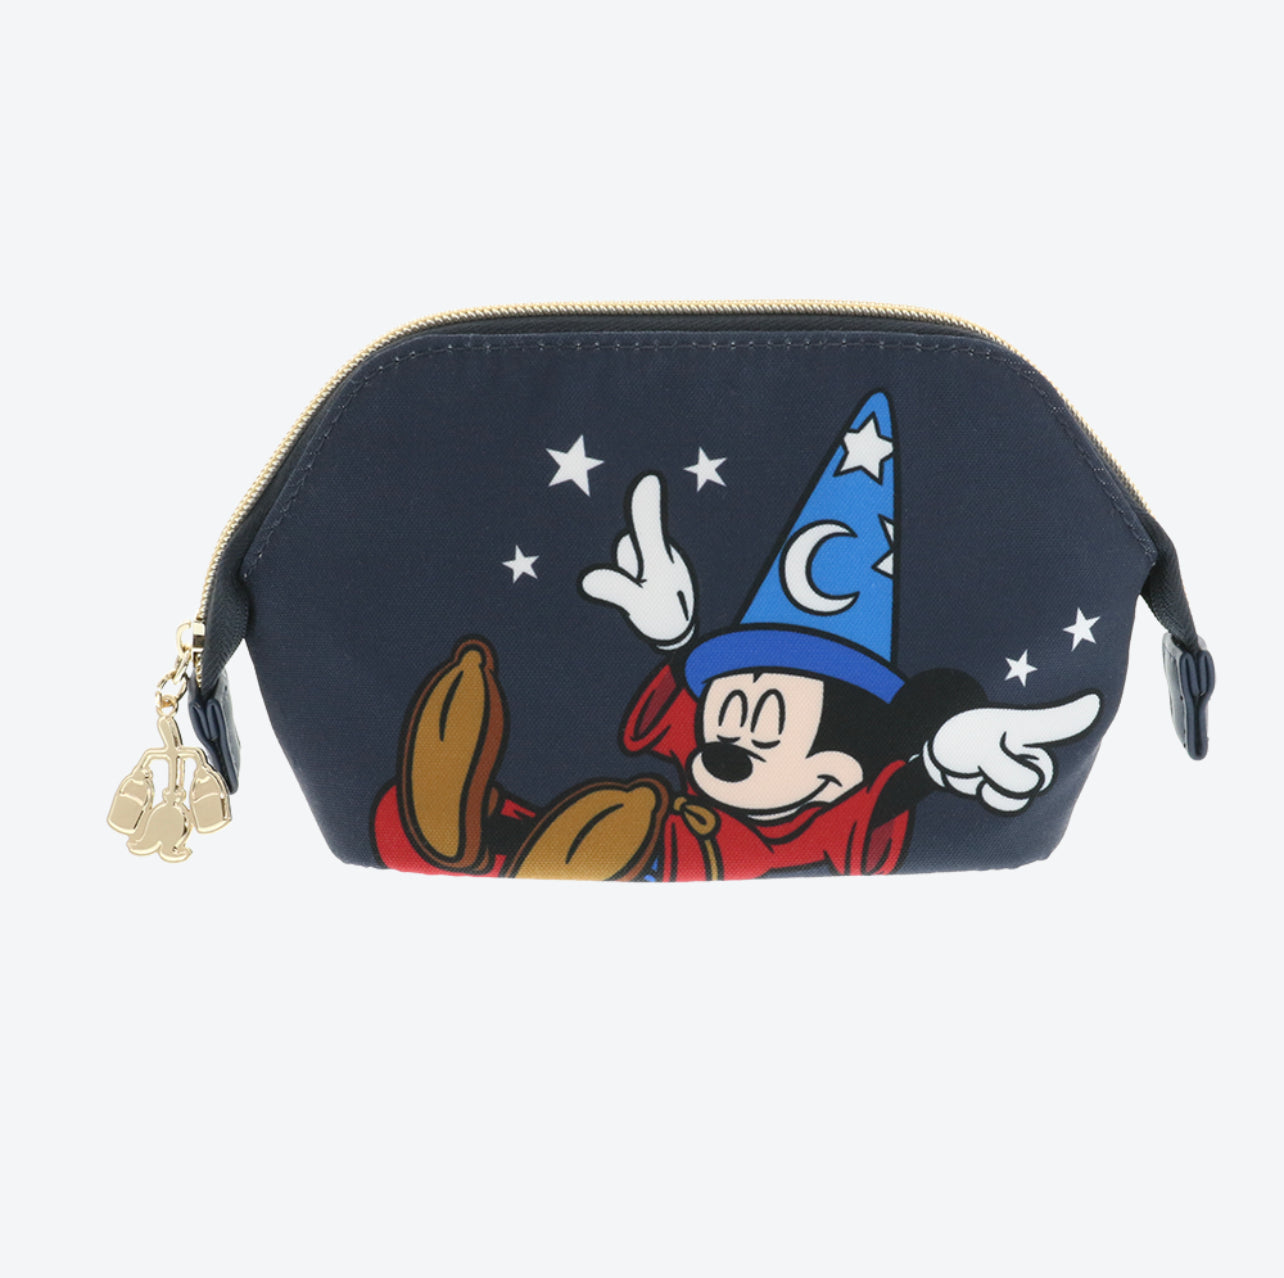 TDR - Disney Movie "Fantasia" Collection x Mickey Mouse "Fantasia" Pouch